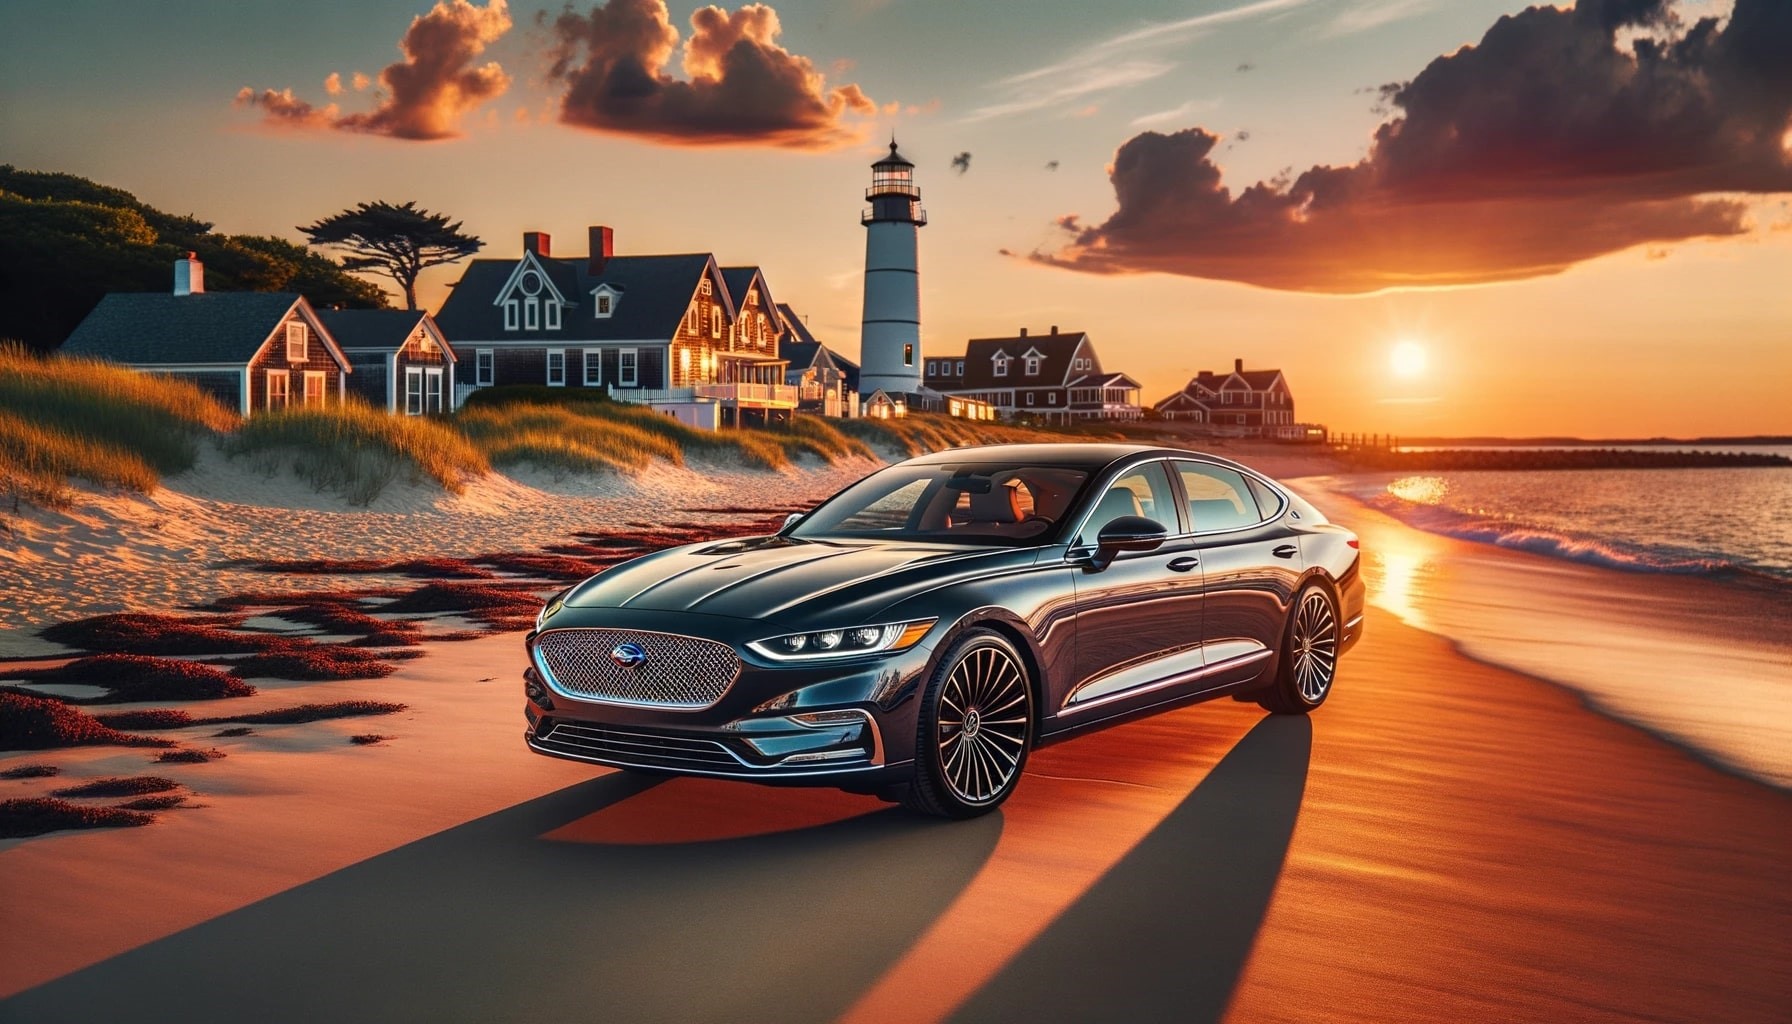 Explore Cape Cod in Style with Professional Car Service